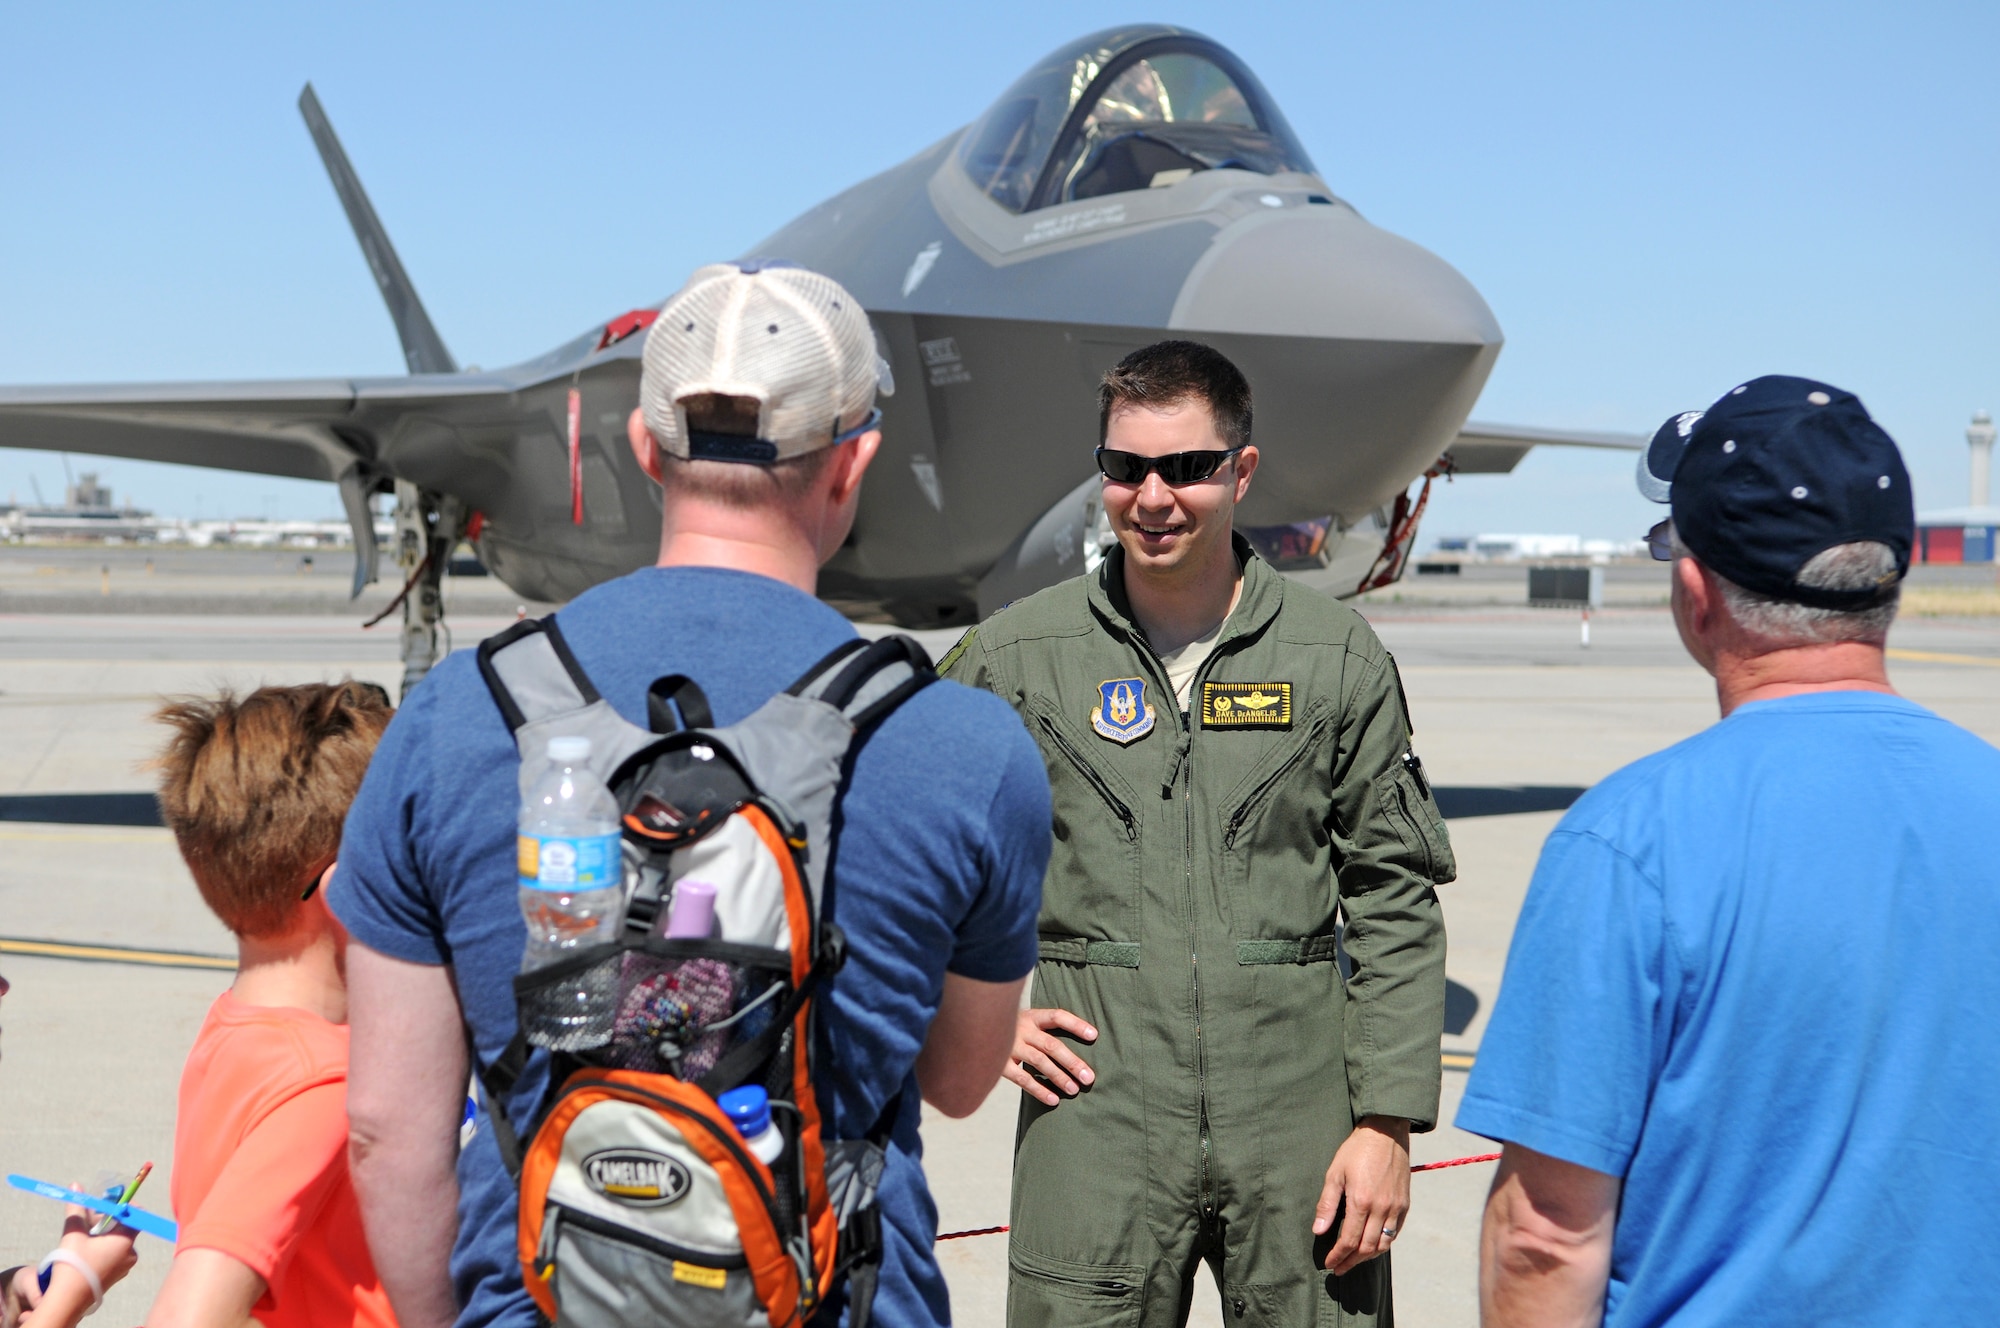 Lt. Col. David DeAngelis, a Reserve F-35 pilot from the 419th Fighter Wing at Hill Air Force Base, talks with Utah Air National Guard Airmen and their family members during Wingman Day on June 10, 2017 at Roland R. Wright Air National Guard Base. Hill AFB provided an F-35 Lightning II aircraft and an F-16 Fighting Falcon as static displays for the event, which drew more than 1,000 guests to the Guard base in Salt Lake City. (U.S. Air National Guard photo by Tech. Sgt. Amber Monio)